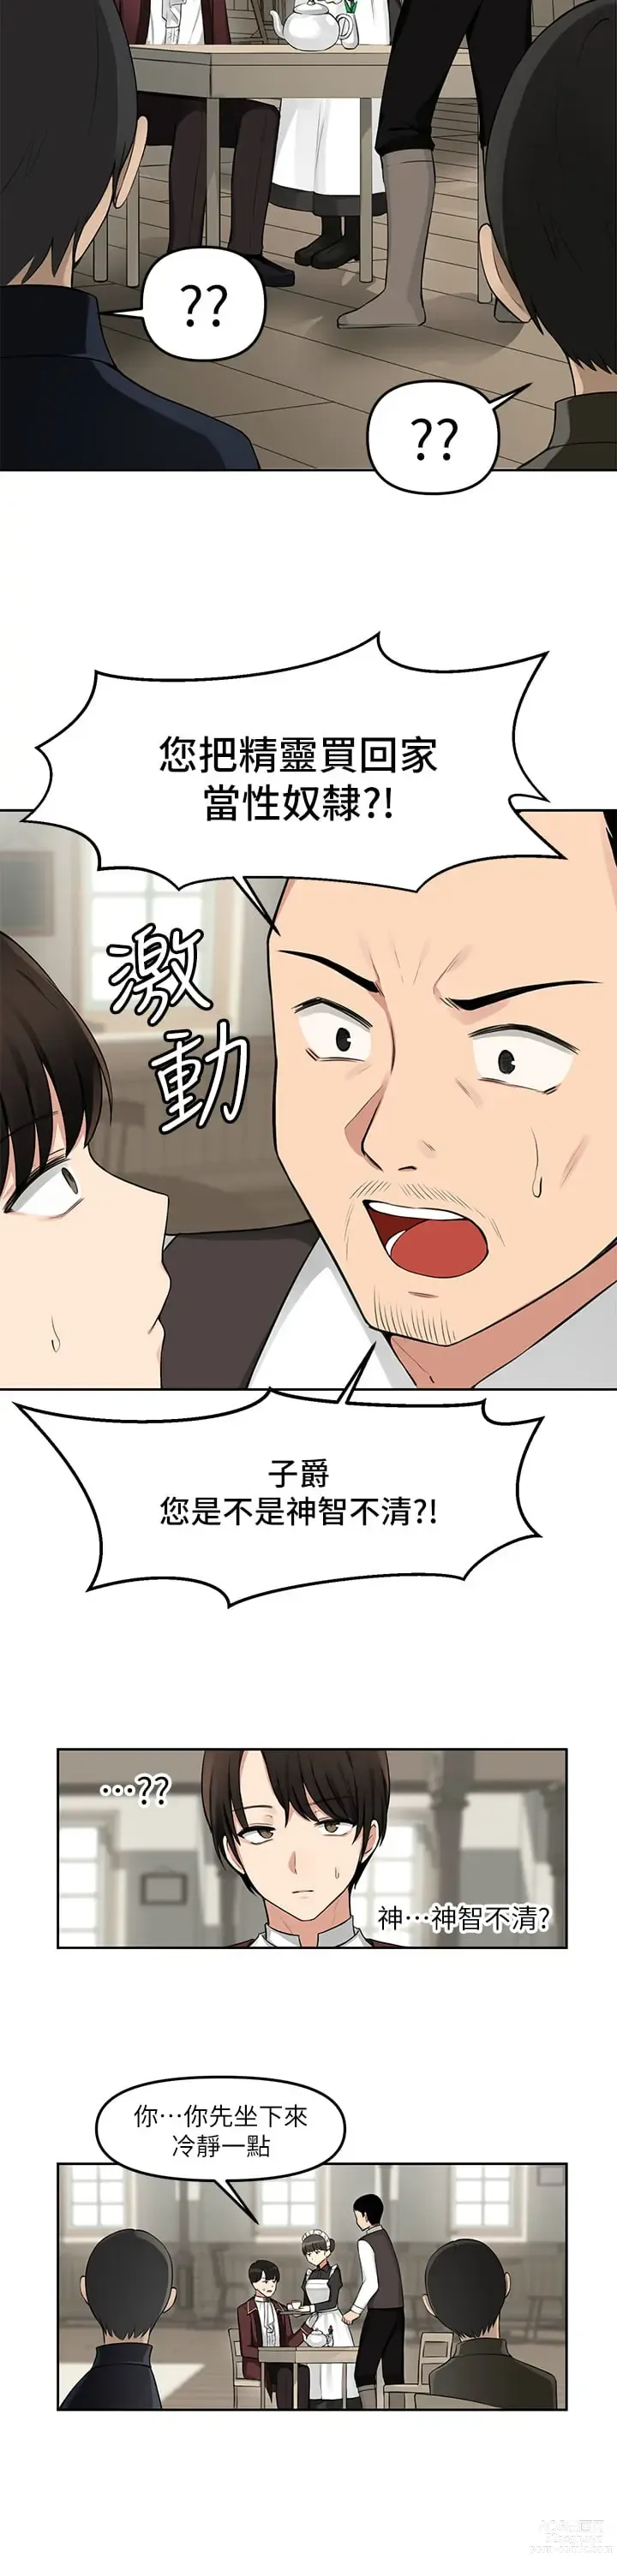 Page 3 of manga 抖M女仆/ Elf Who Likes To Be Humiliated